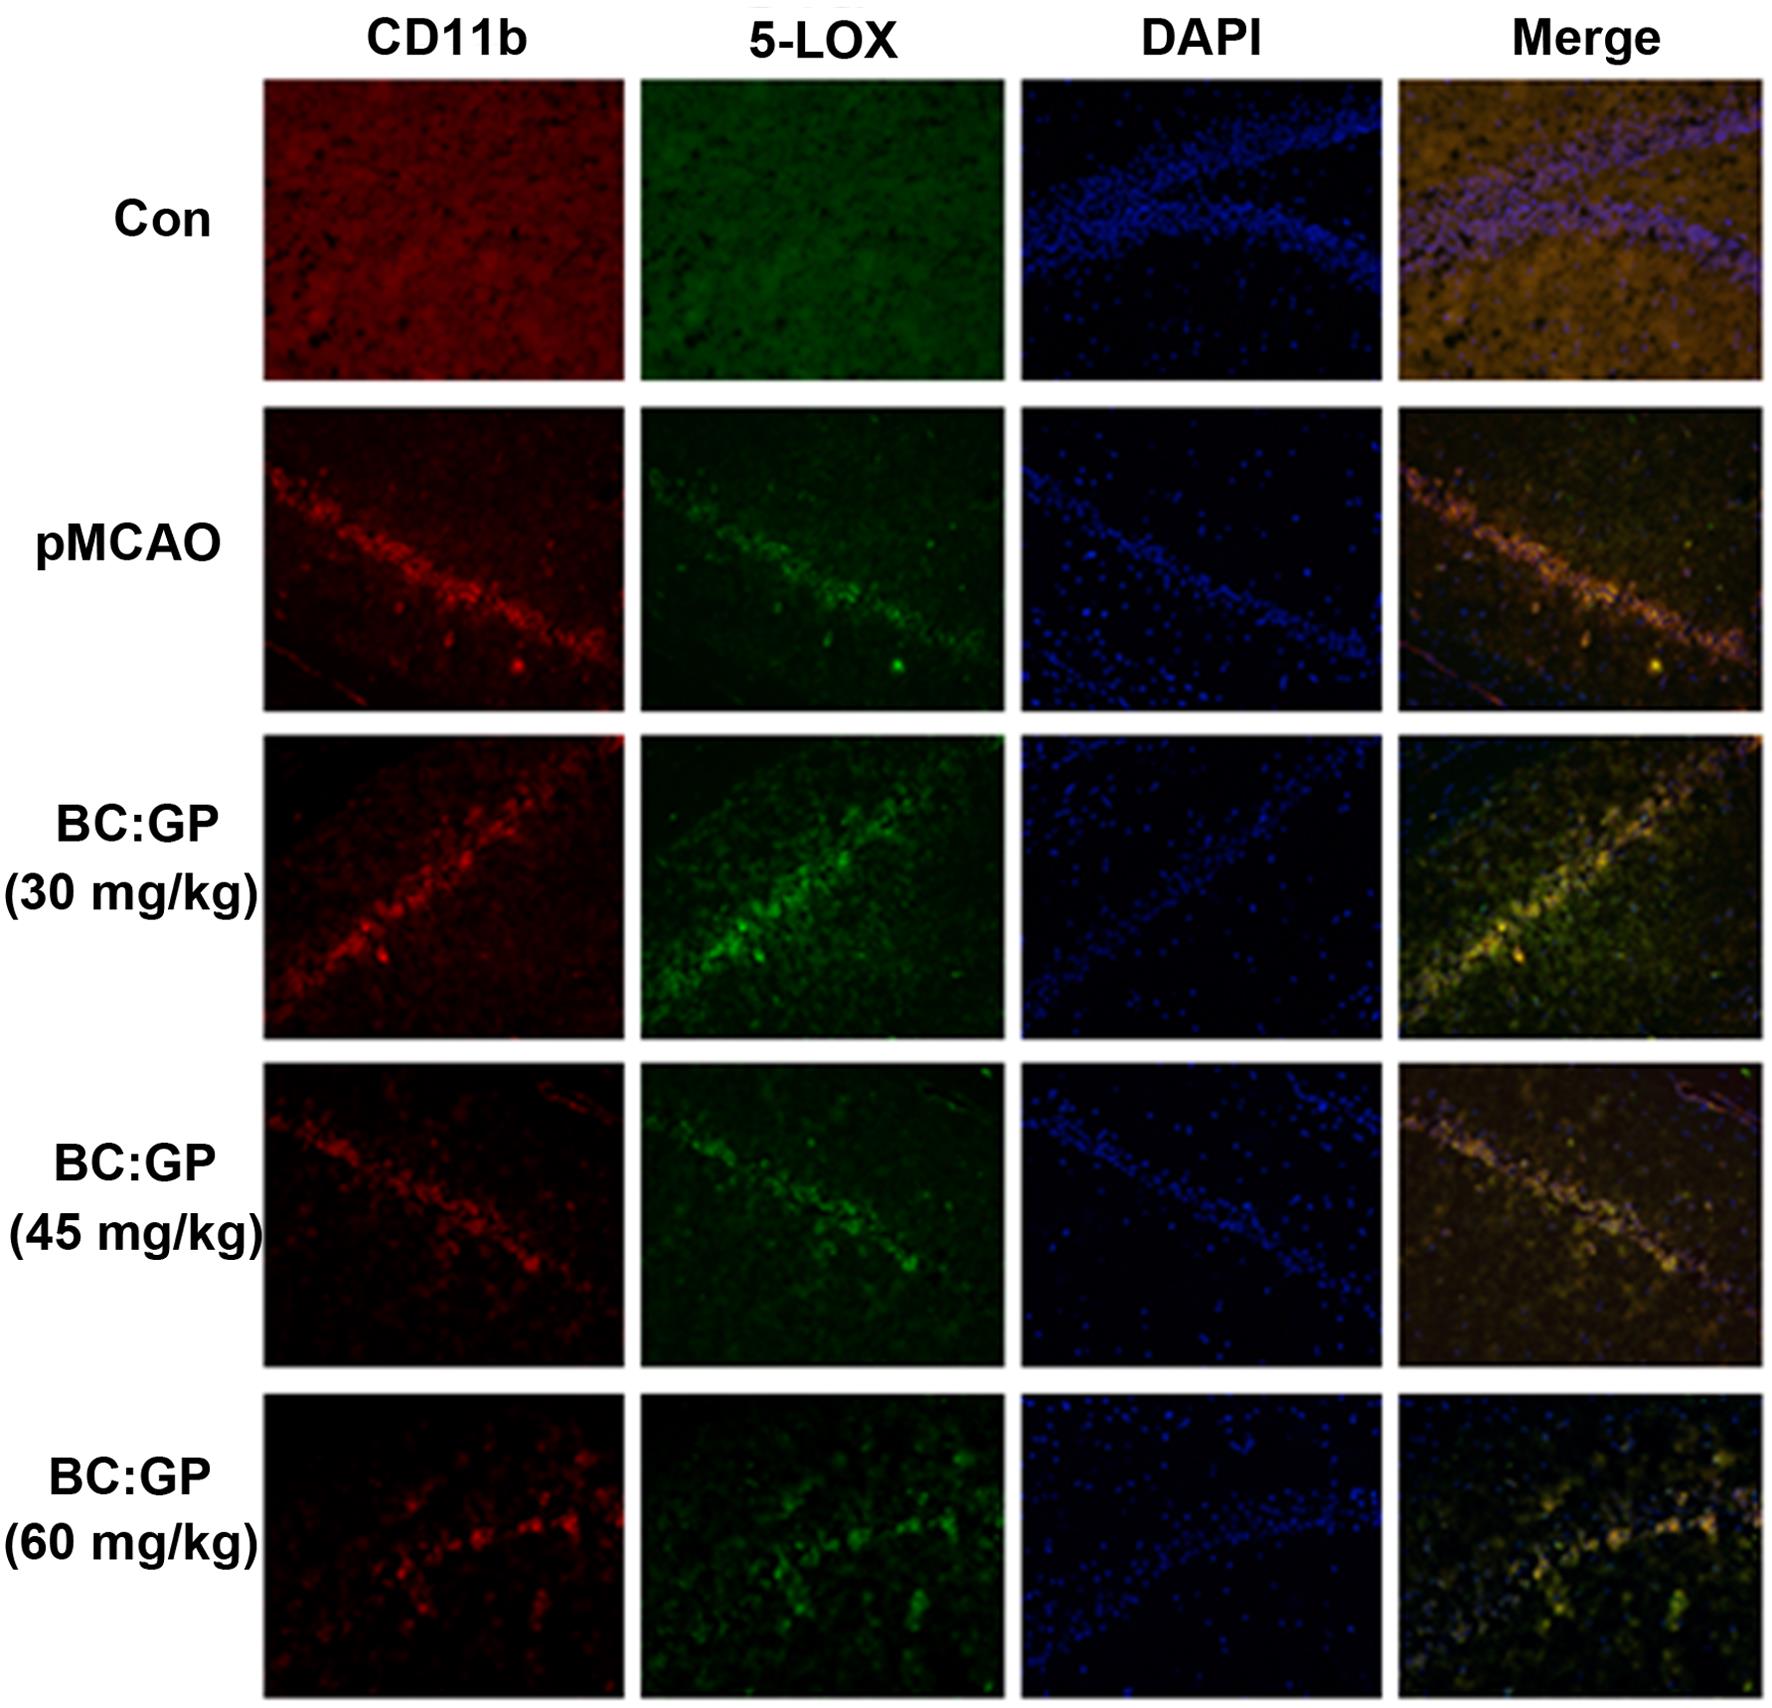 Effect of the BC/GP combination (7:3) on microglia and 5-LOX expression in the brain tissue of pMCAO rats (14 d).